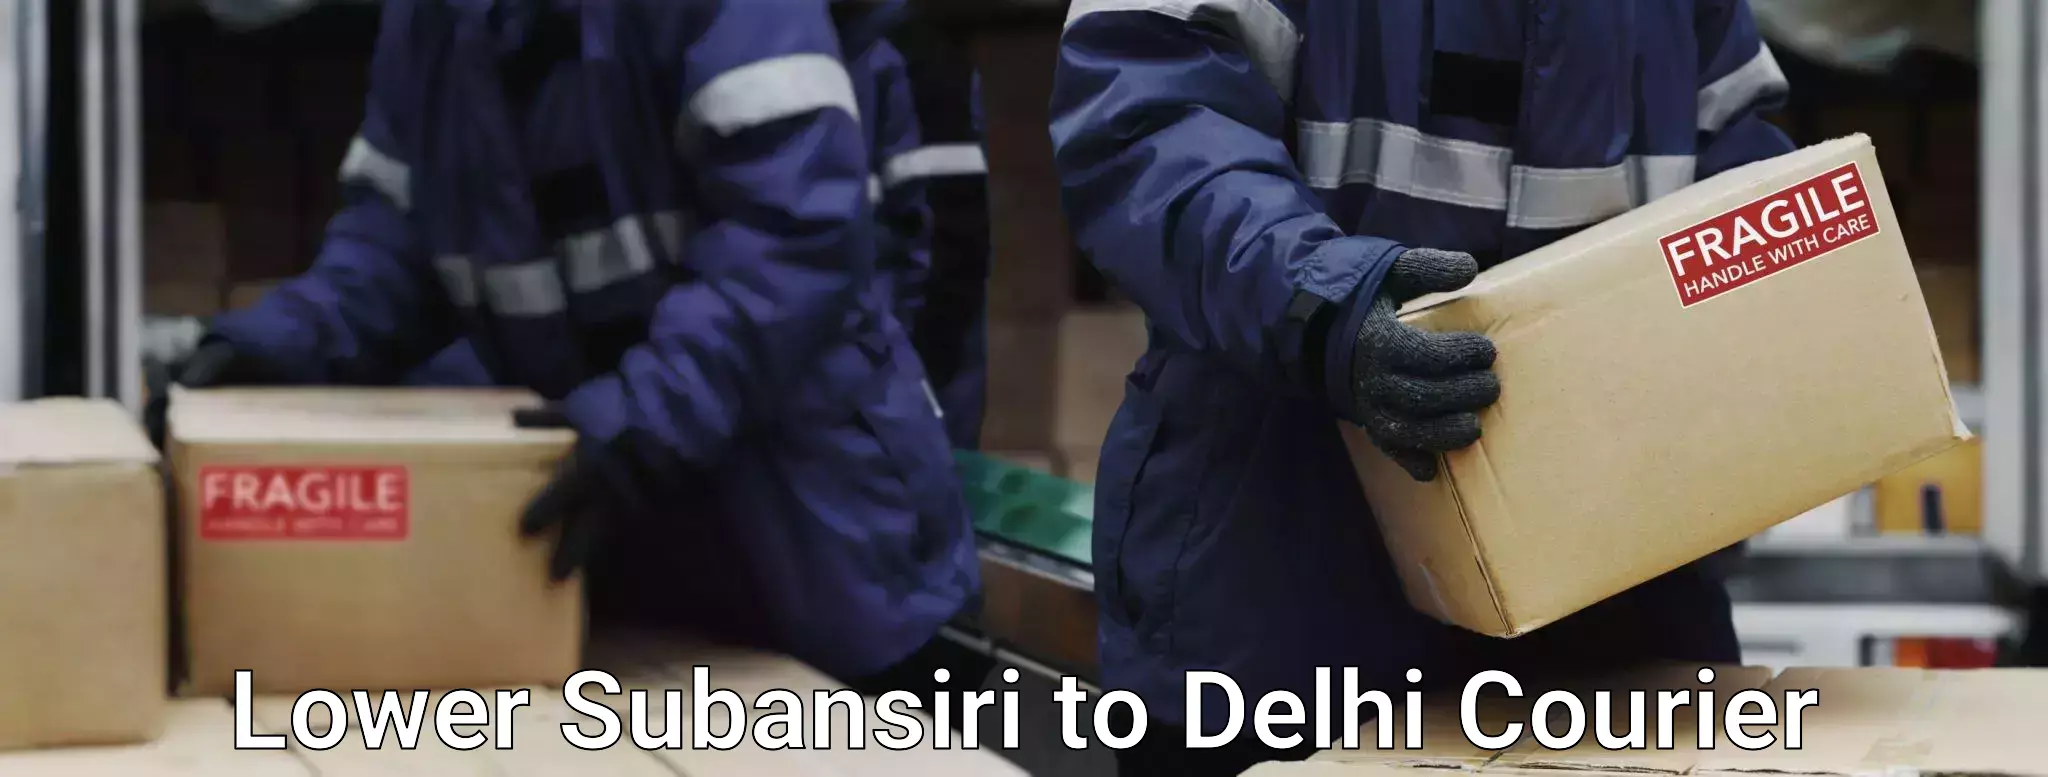 Luggage delivery providers Lower Subansiri to NCR